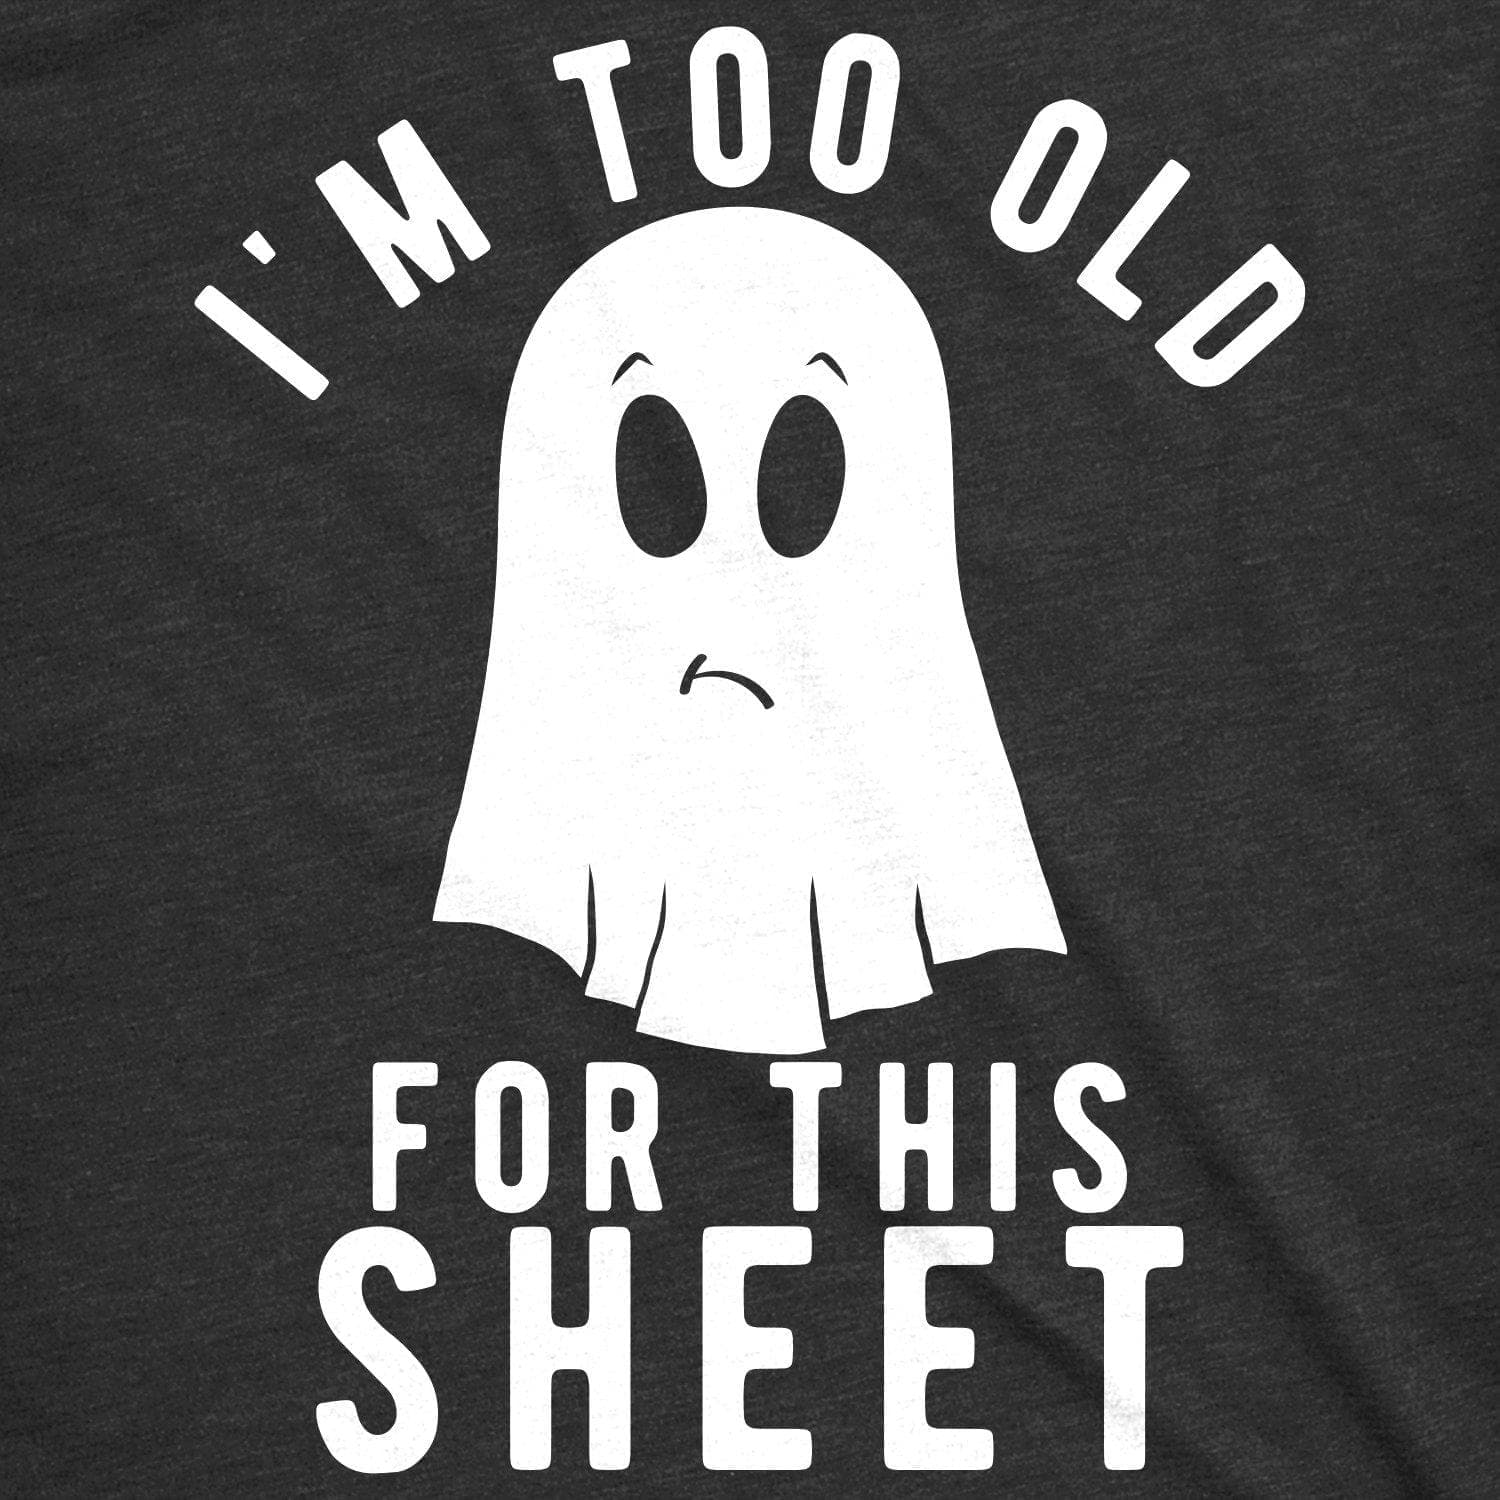 I'm Too Old For This Sheet Men's Tshirt - Crazy Dog T-Shirts